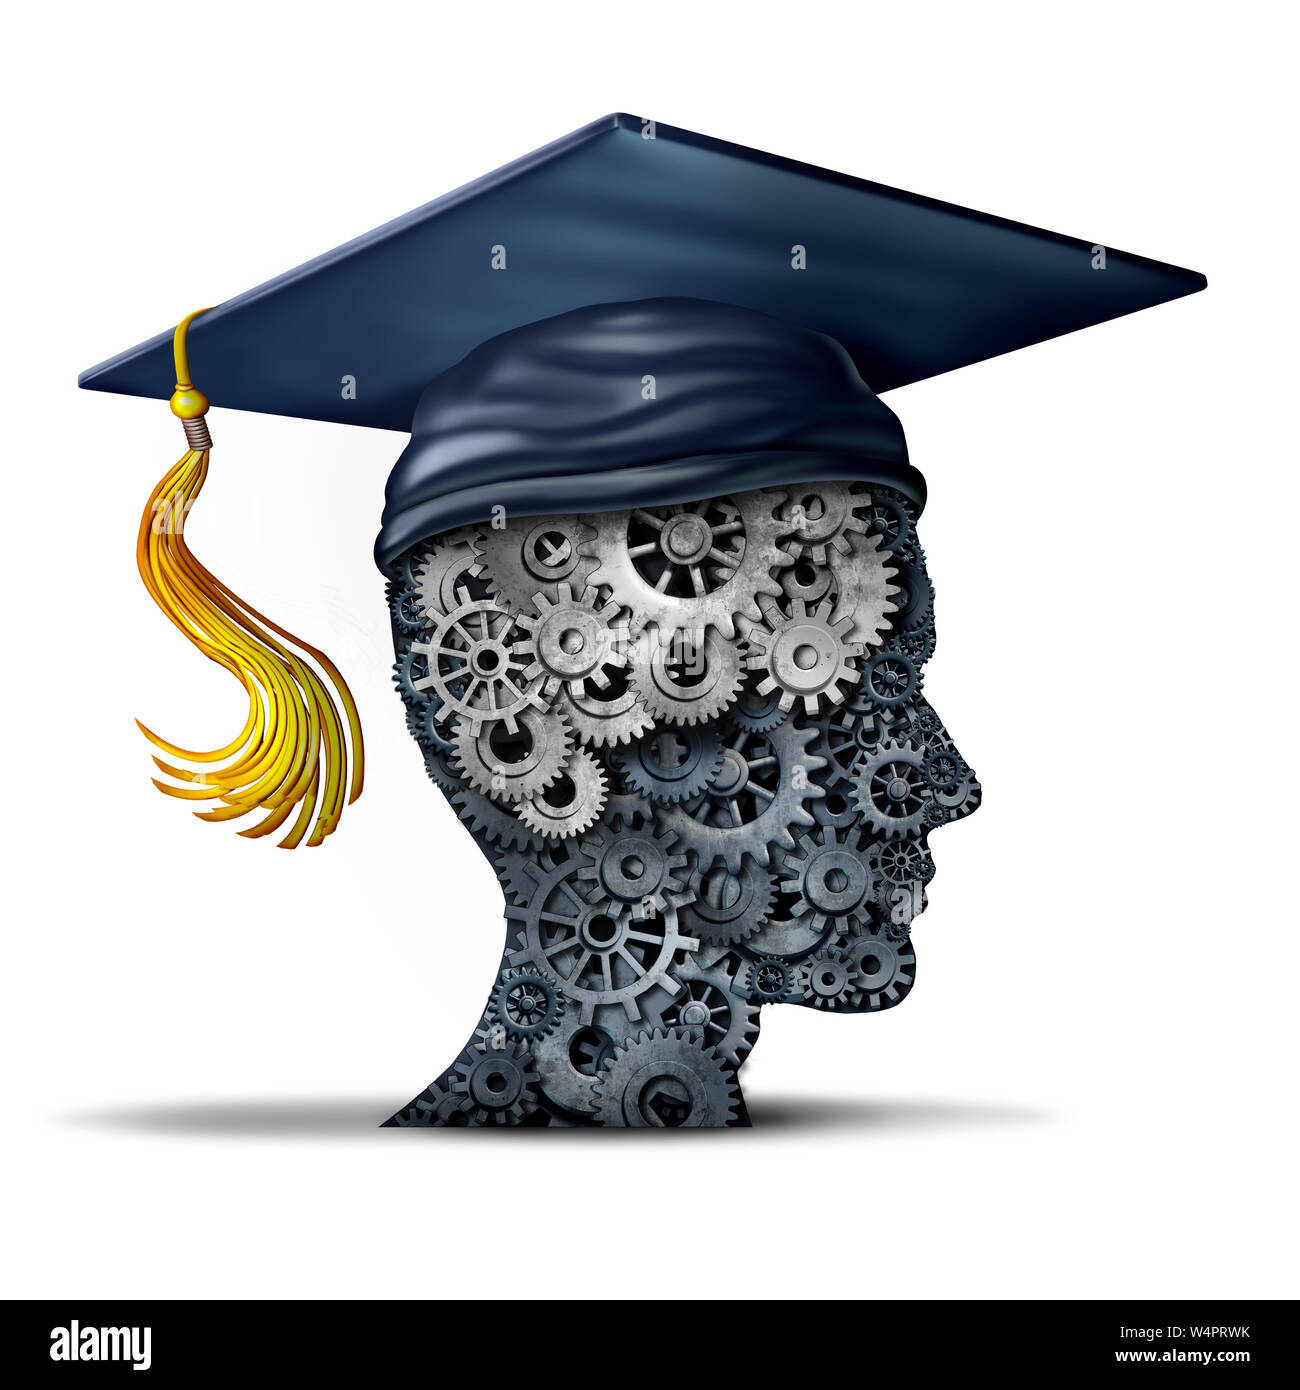 Business training concept of corporate education and work skills or career skill idea and engineering student icon as a 3D illustration. Stock Photo